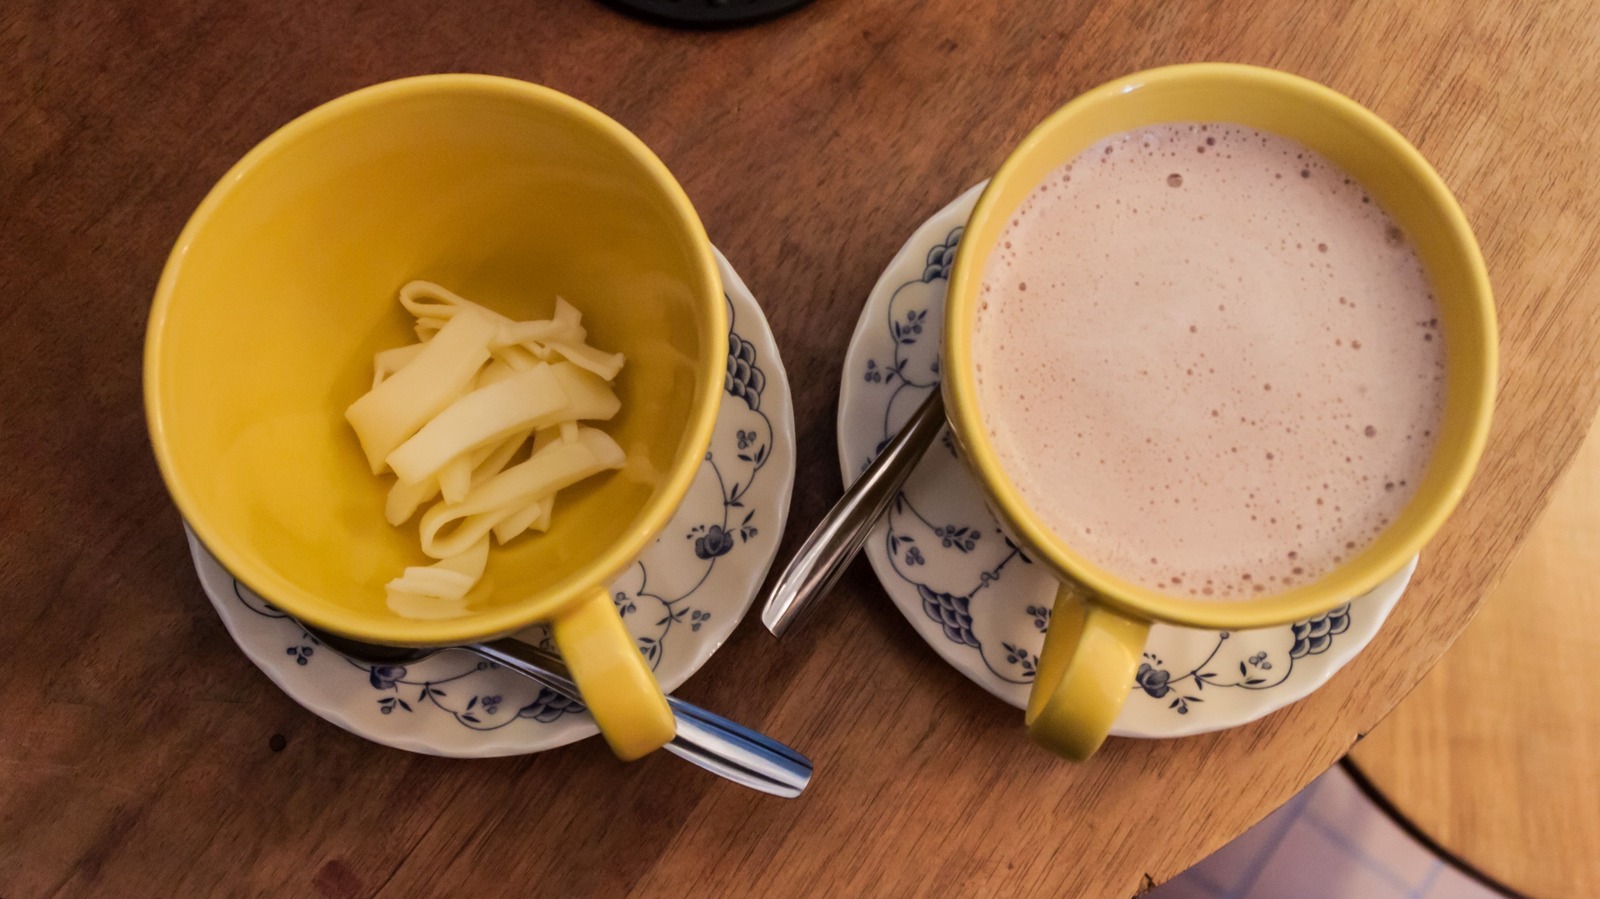 https://www.tastingtable.com/img/gallery/in-colombia-cheese-is-a-star-ingredient-in-hot-chocolate/l-intro-1696447165.jpg